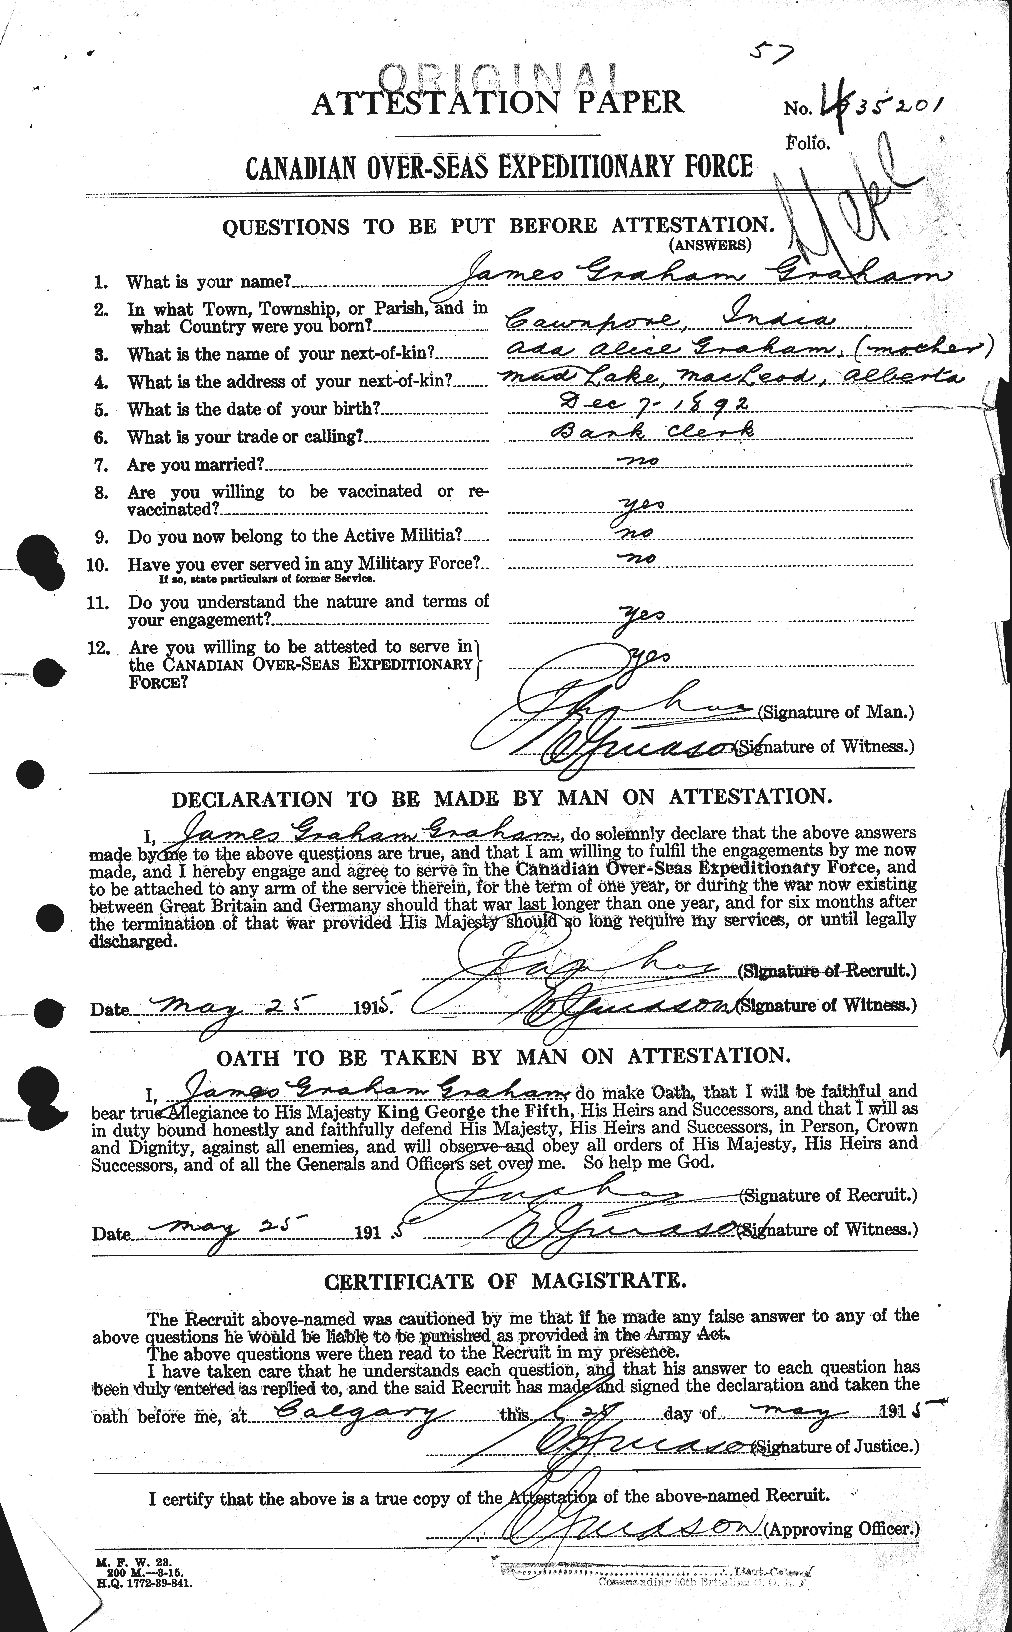 Personnel Records of the First World War - CEF 357822a